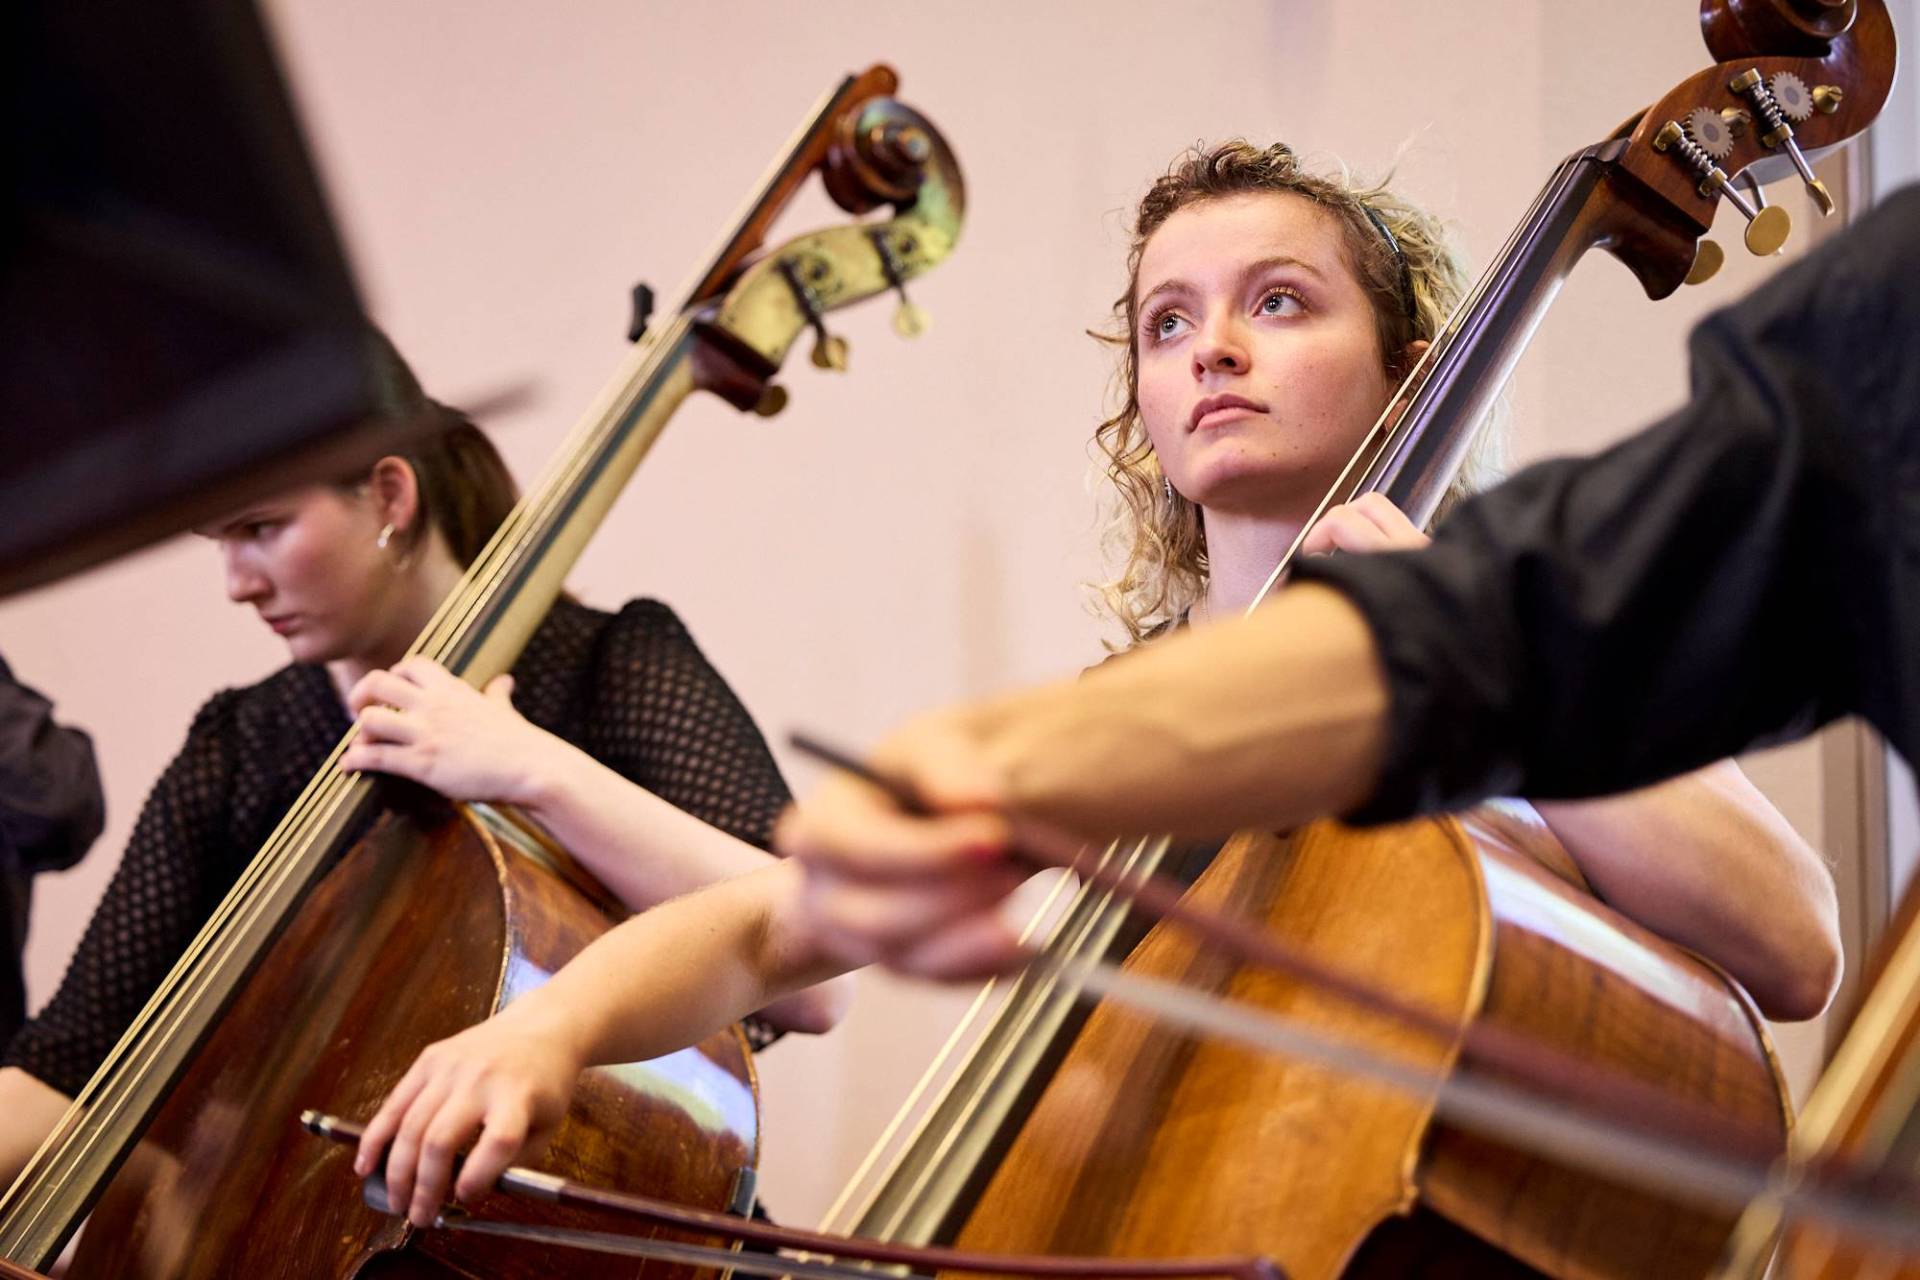 A cellist of the Australian Youth Orchestra looks up whilst playing at AYO National Music Camp. She has curly blond hair and is wearing concert blacks. Credit: Claudio Raschella 2023